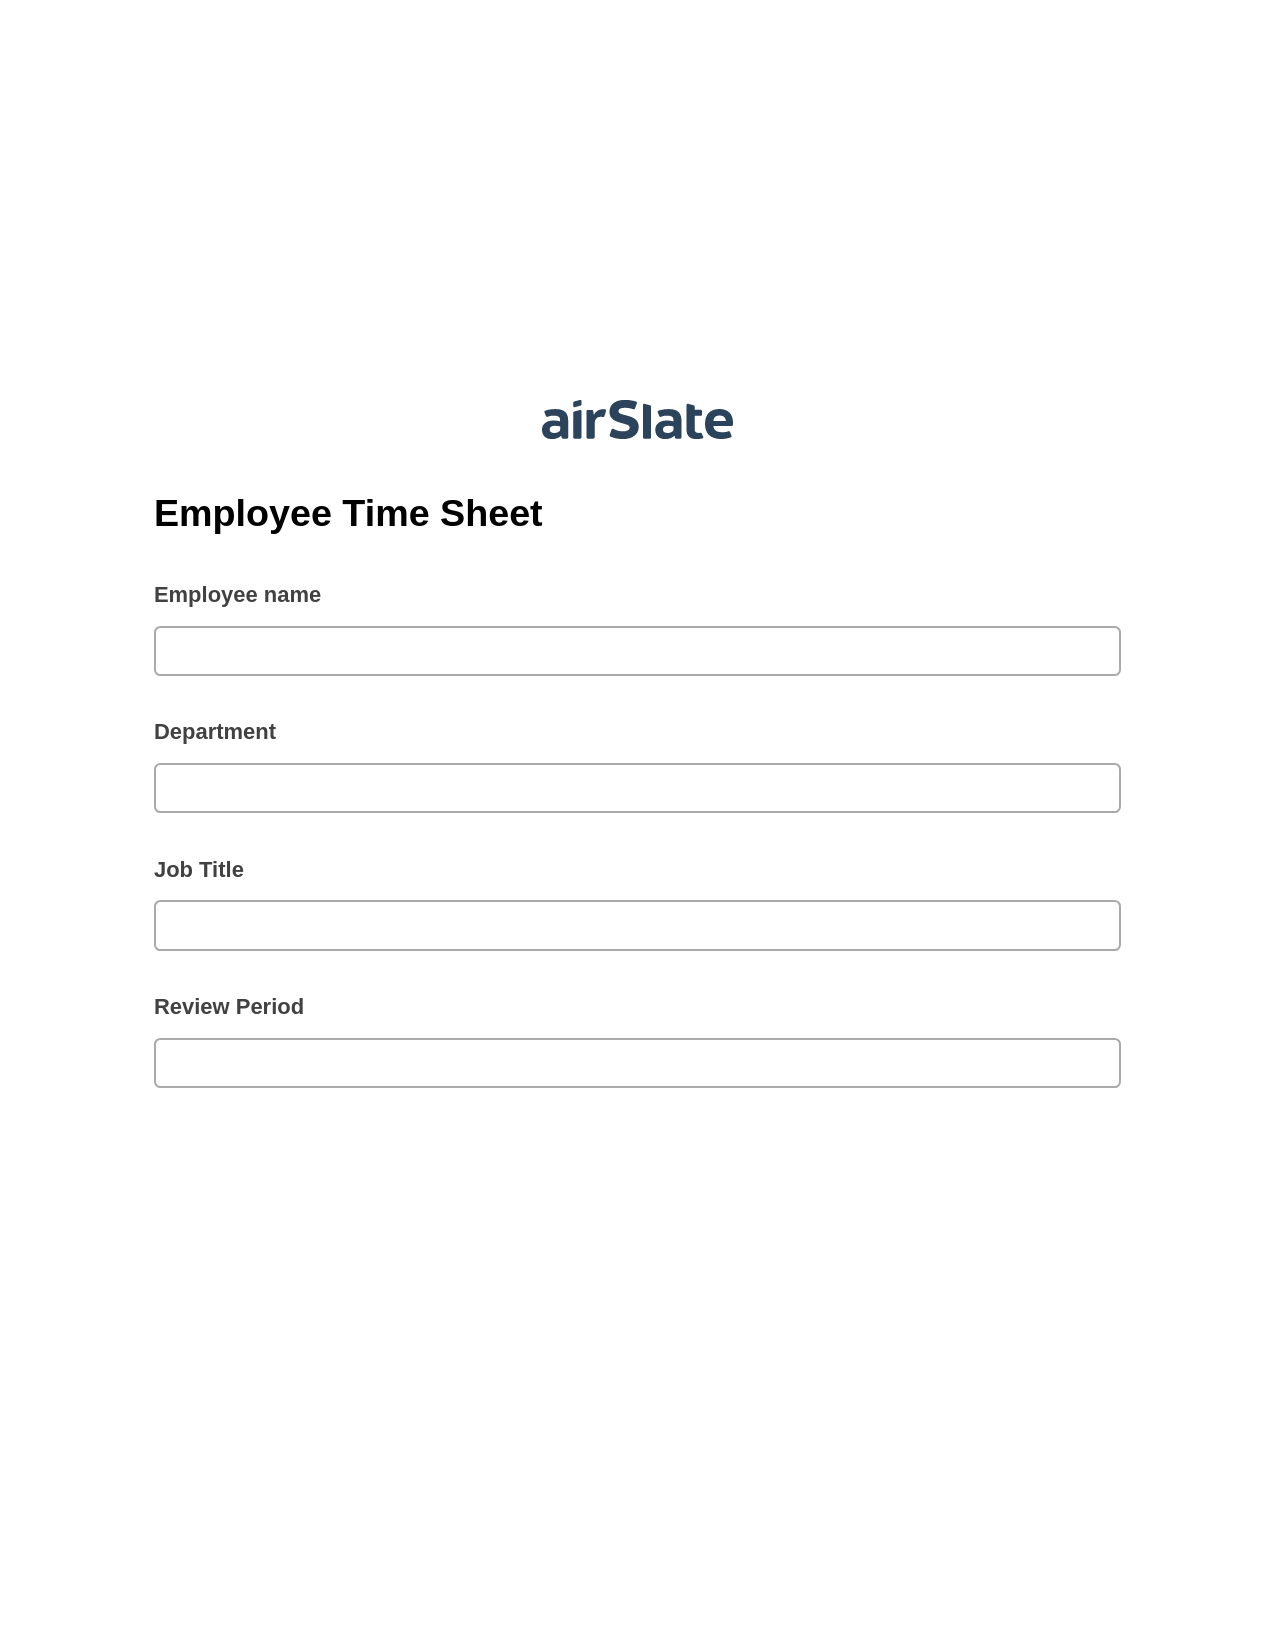 Employee Time Sheet Pre-fill from Excel Spreadsheet Bot, Update Audit Trail Bot, Archive to Google Drive Bot